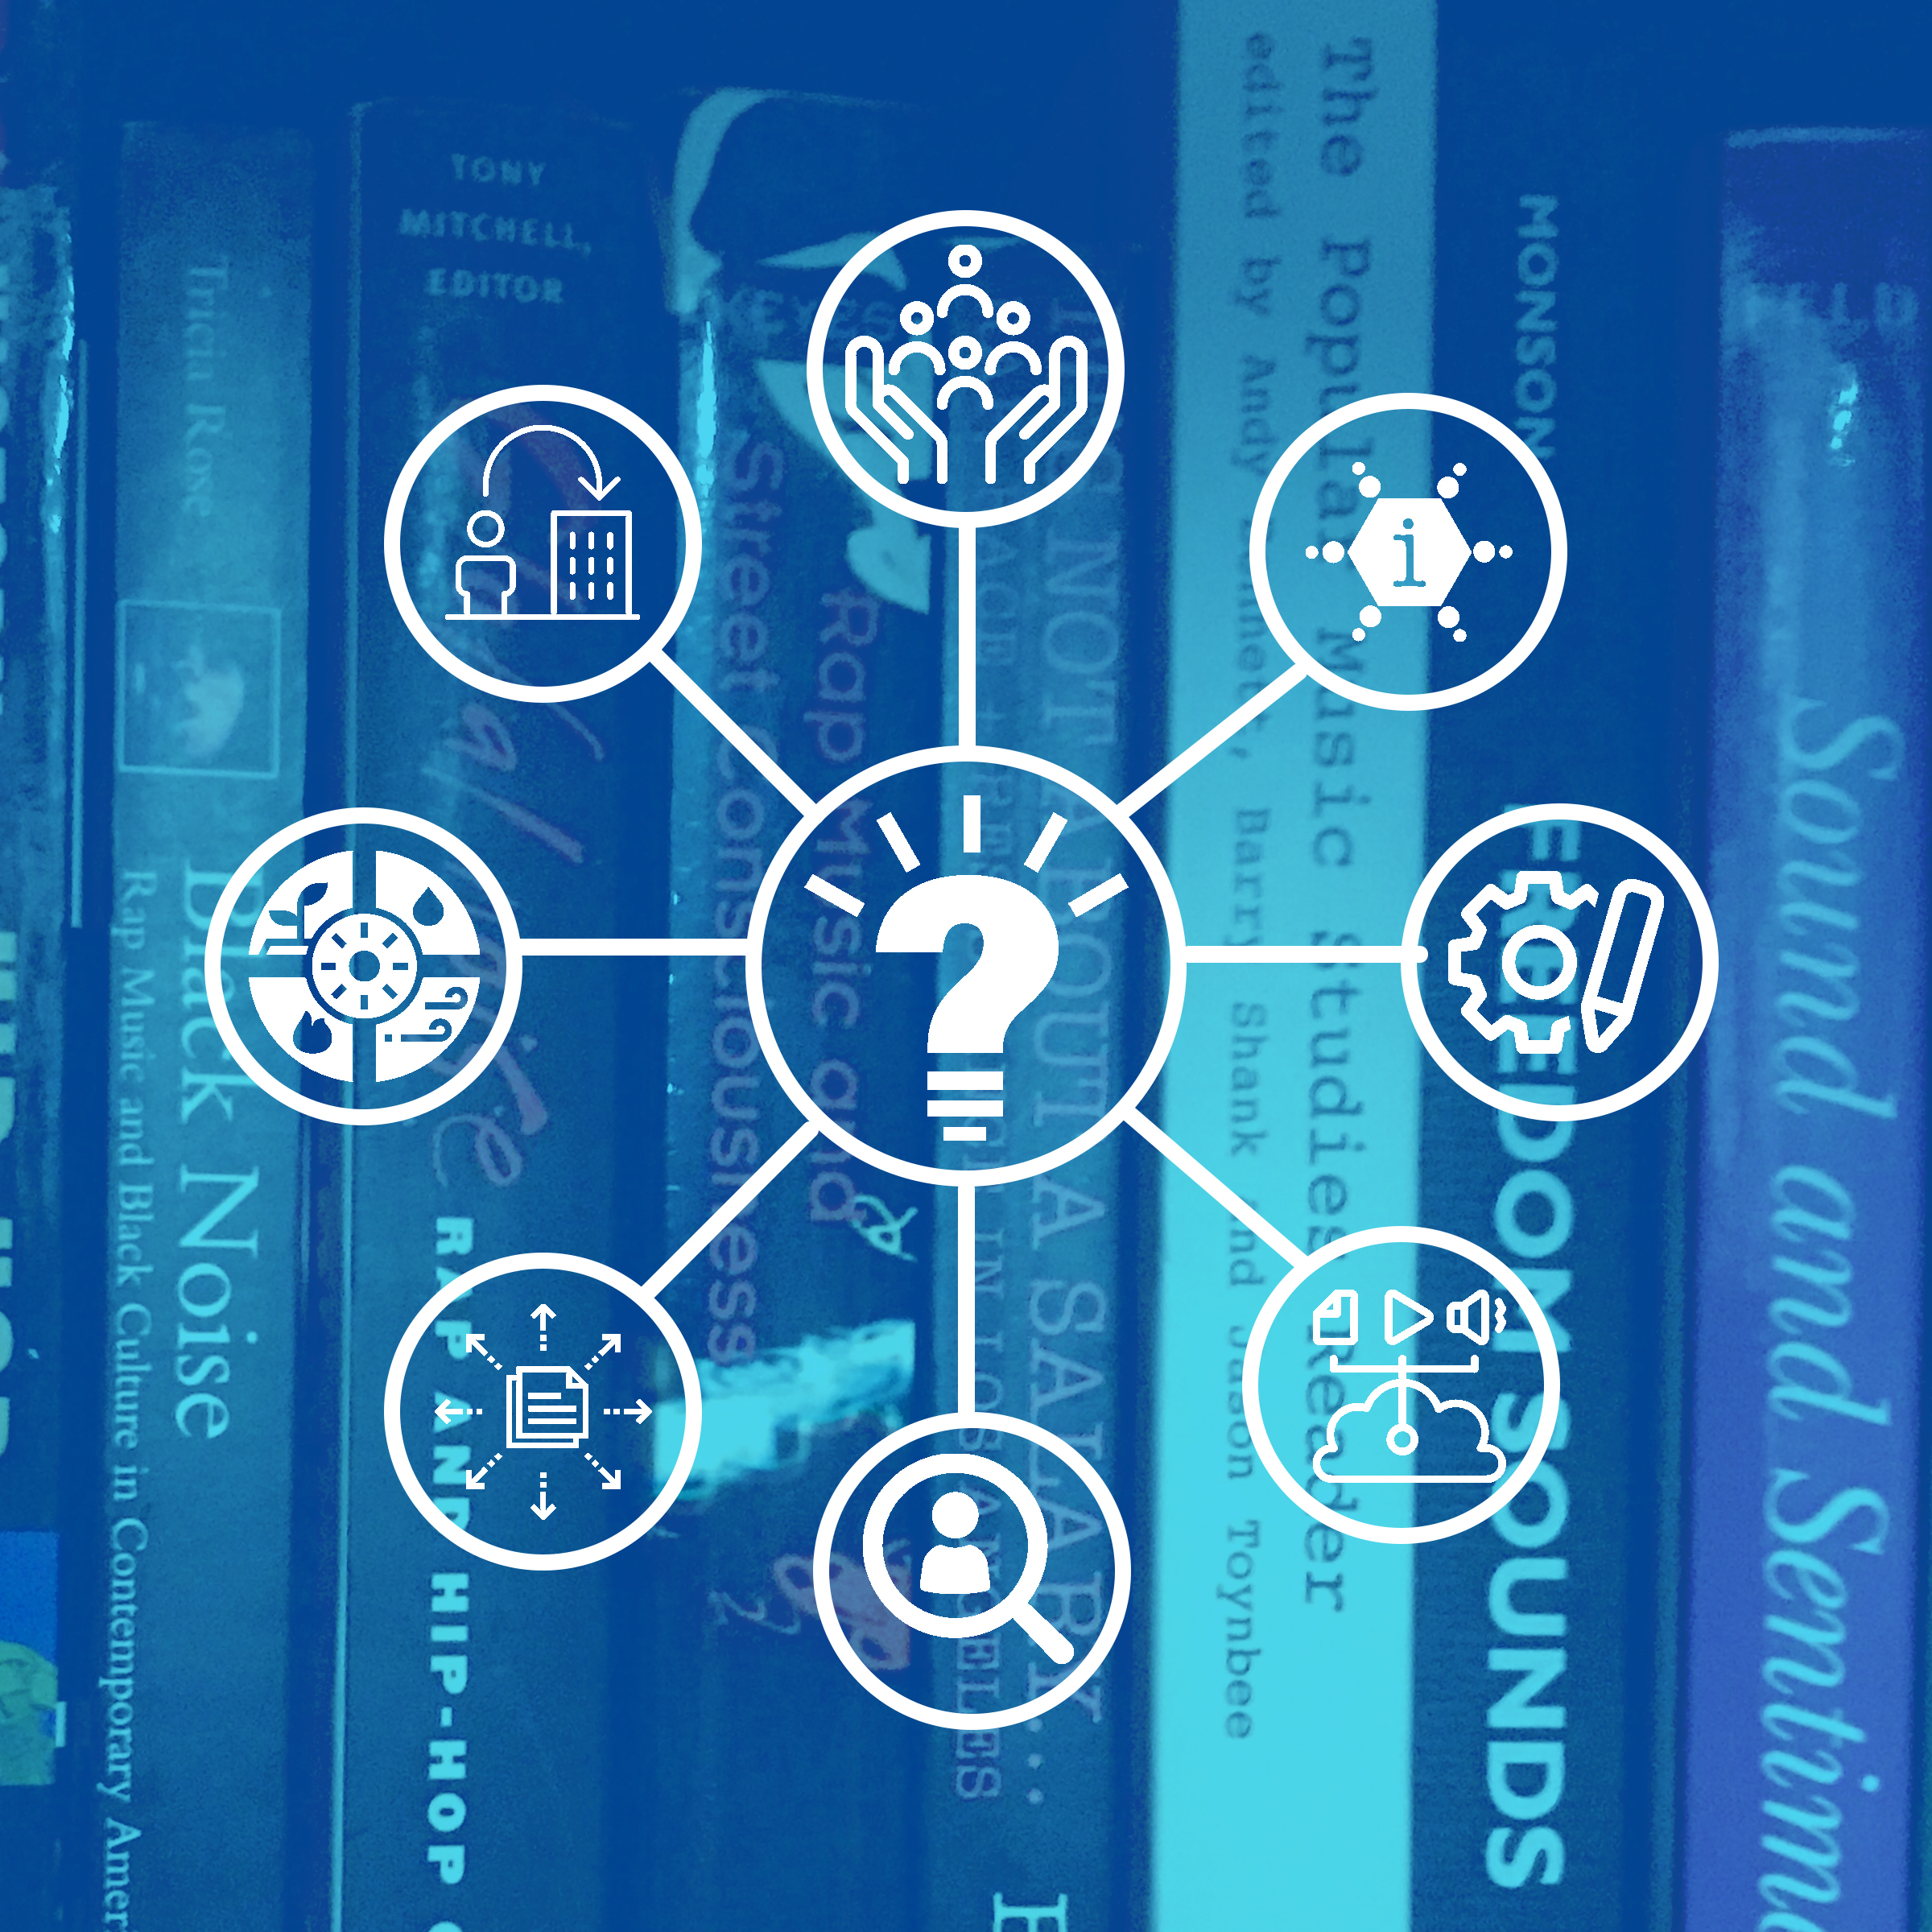 Resources - icons representing resources (hands uplifitng people, people in building, magnifying glass, etc) surrounding a question lightbulb icon, icons overlayed onto Black literature tinted in blue.